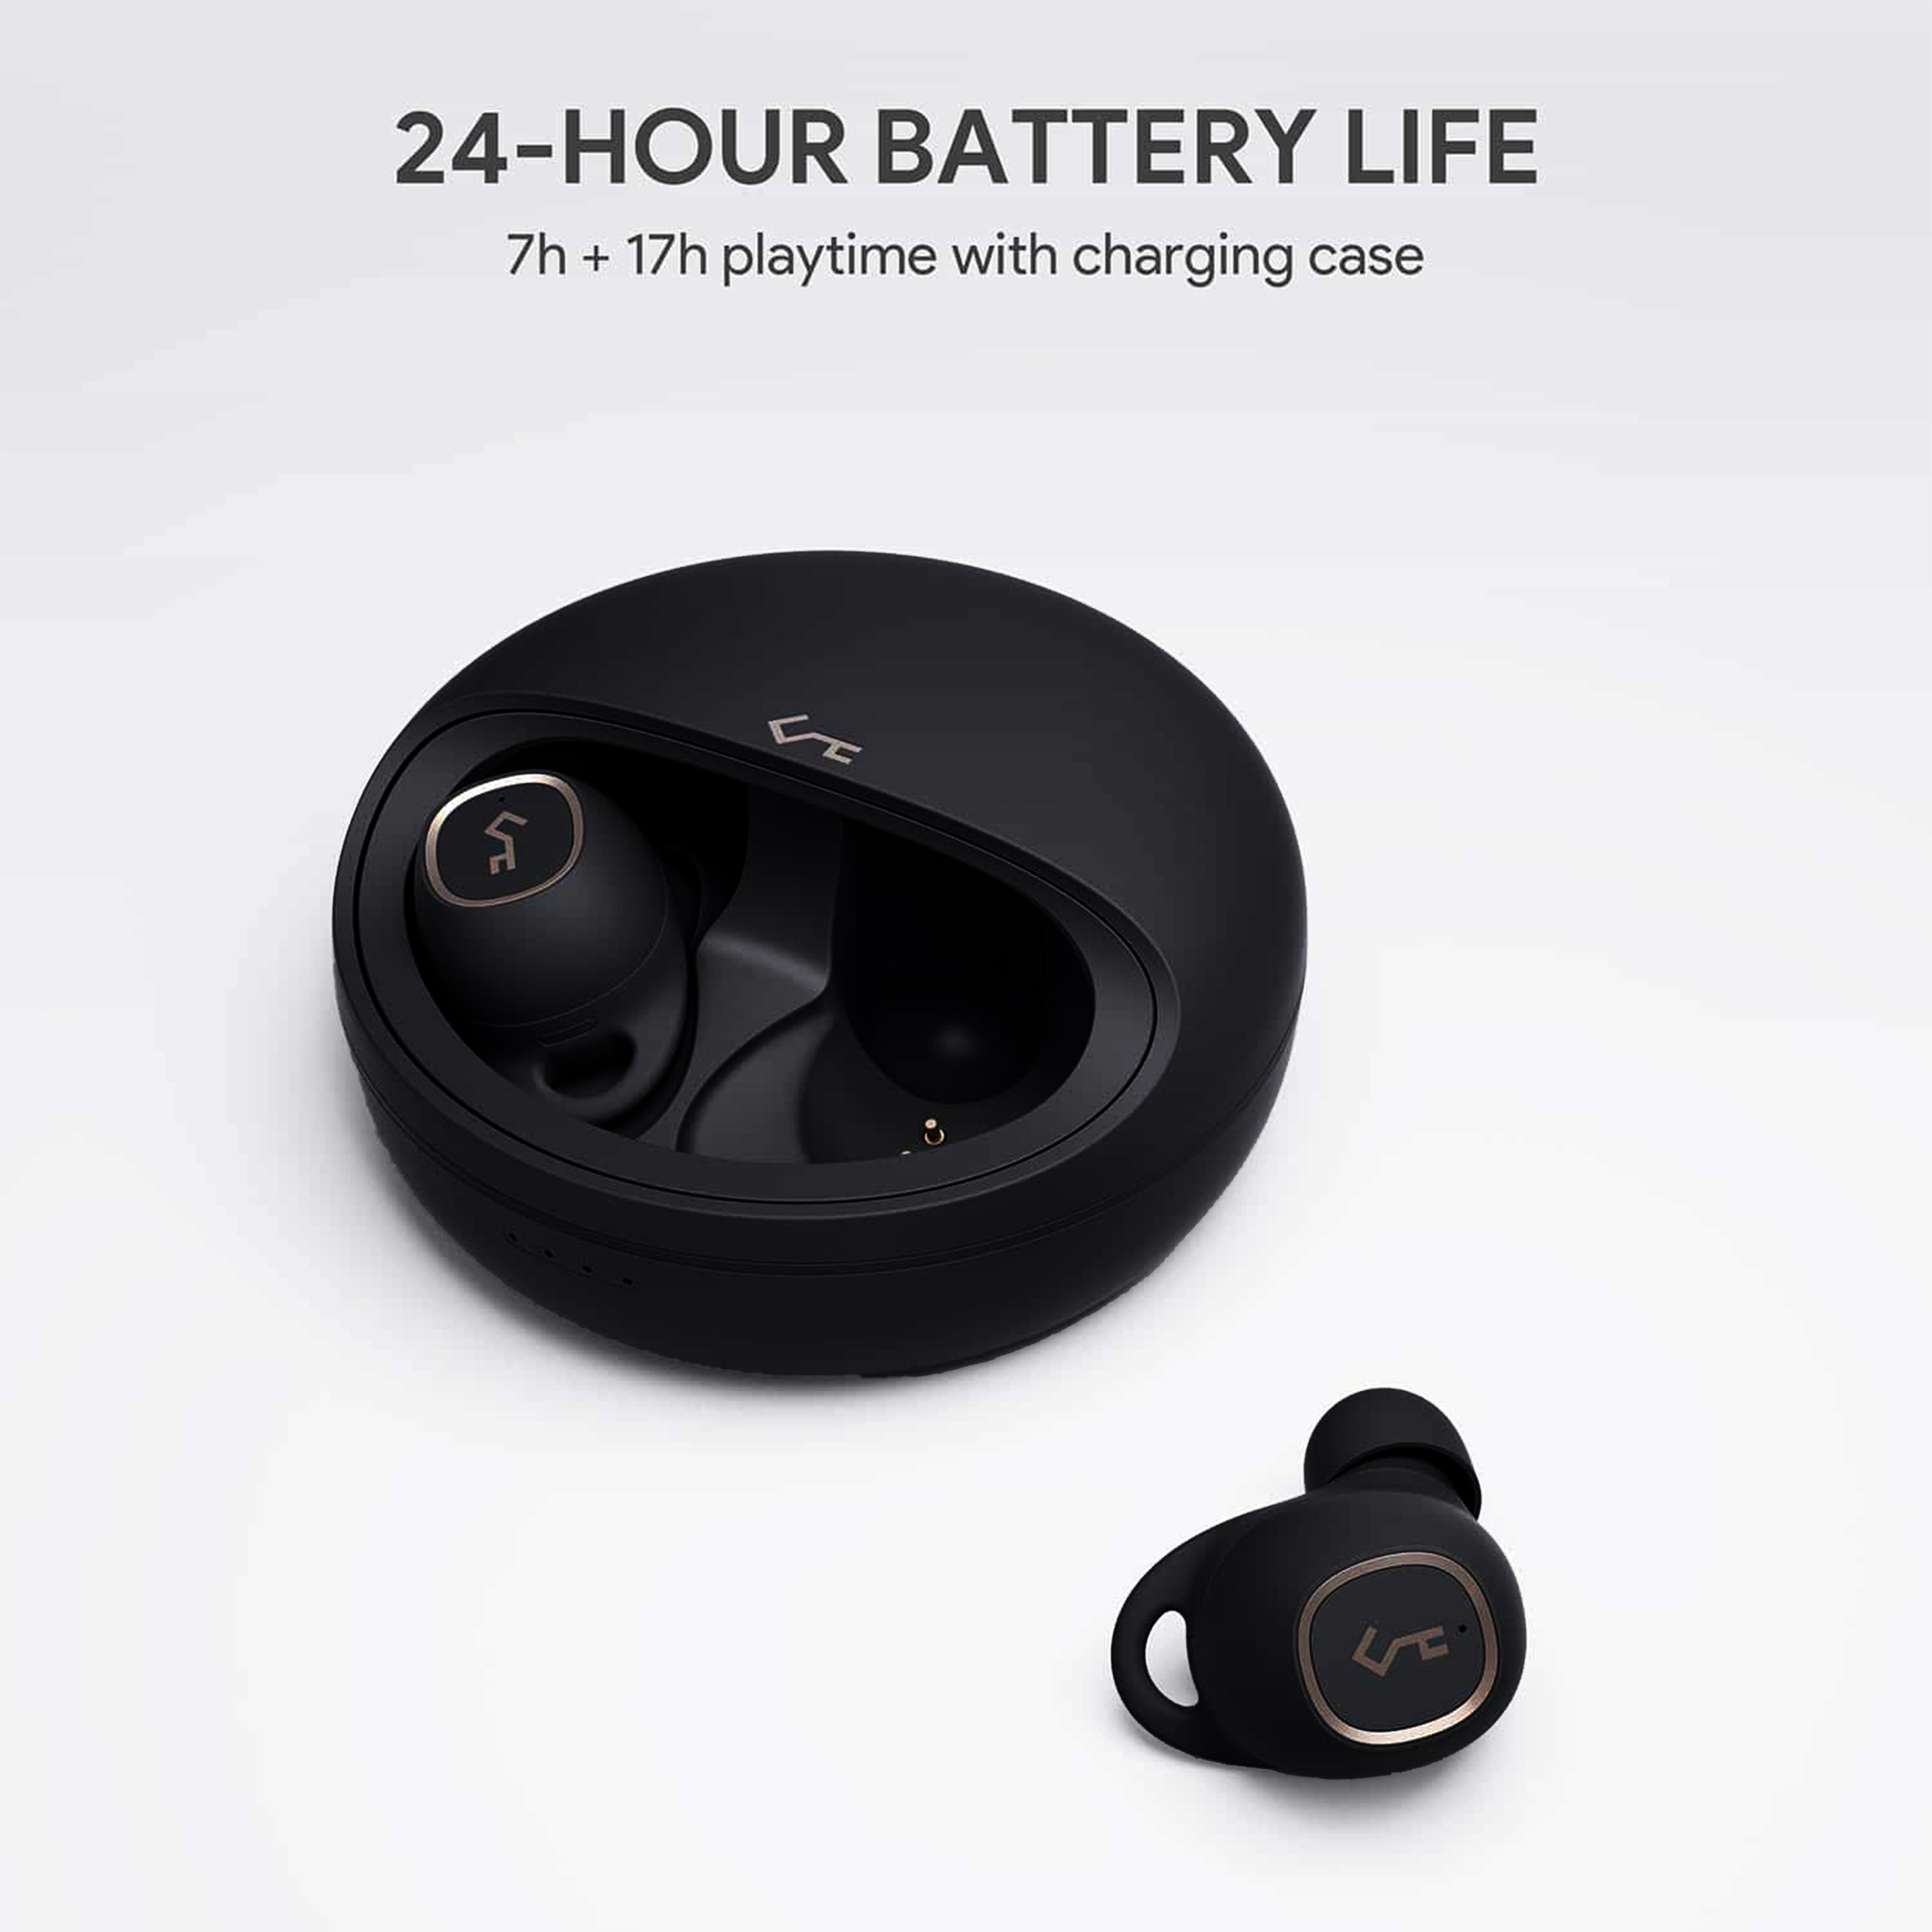 EP-T10 Lite Key Series IPX5 BT 5.0 TWS True Wireless Earphone with Touch Control